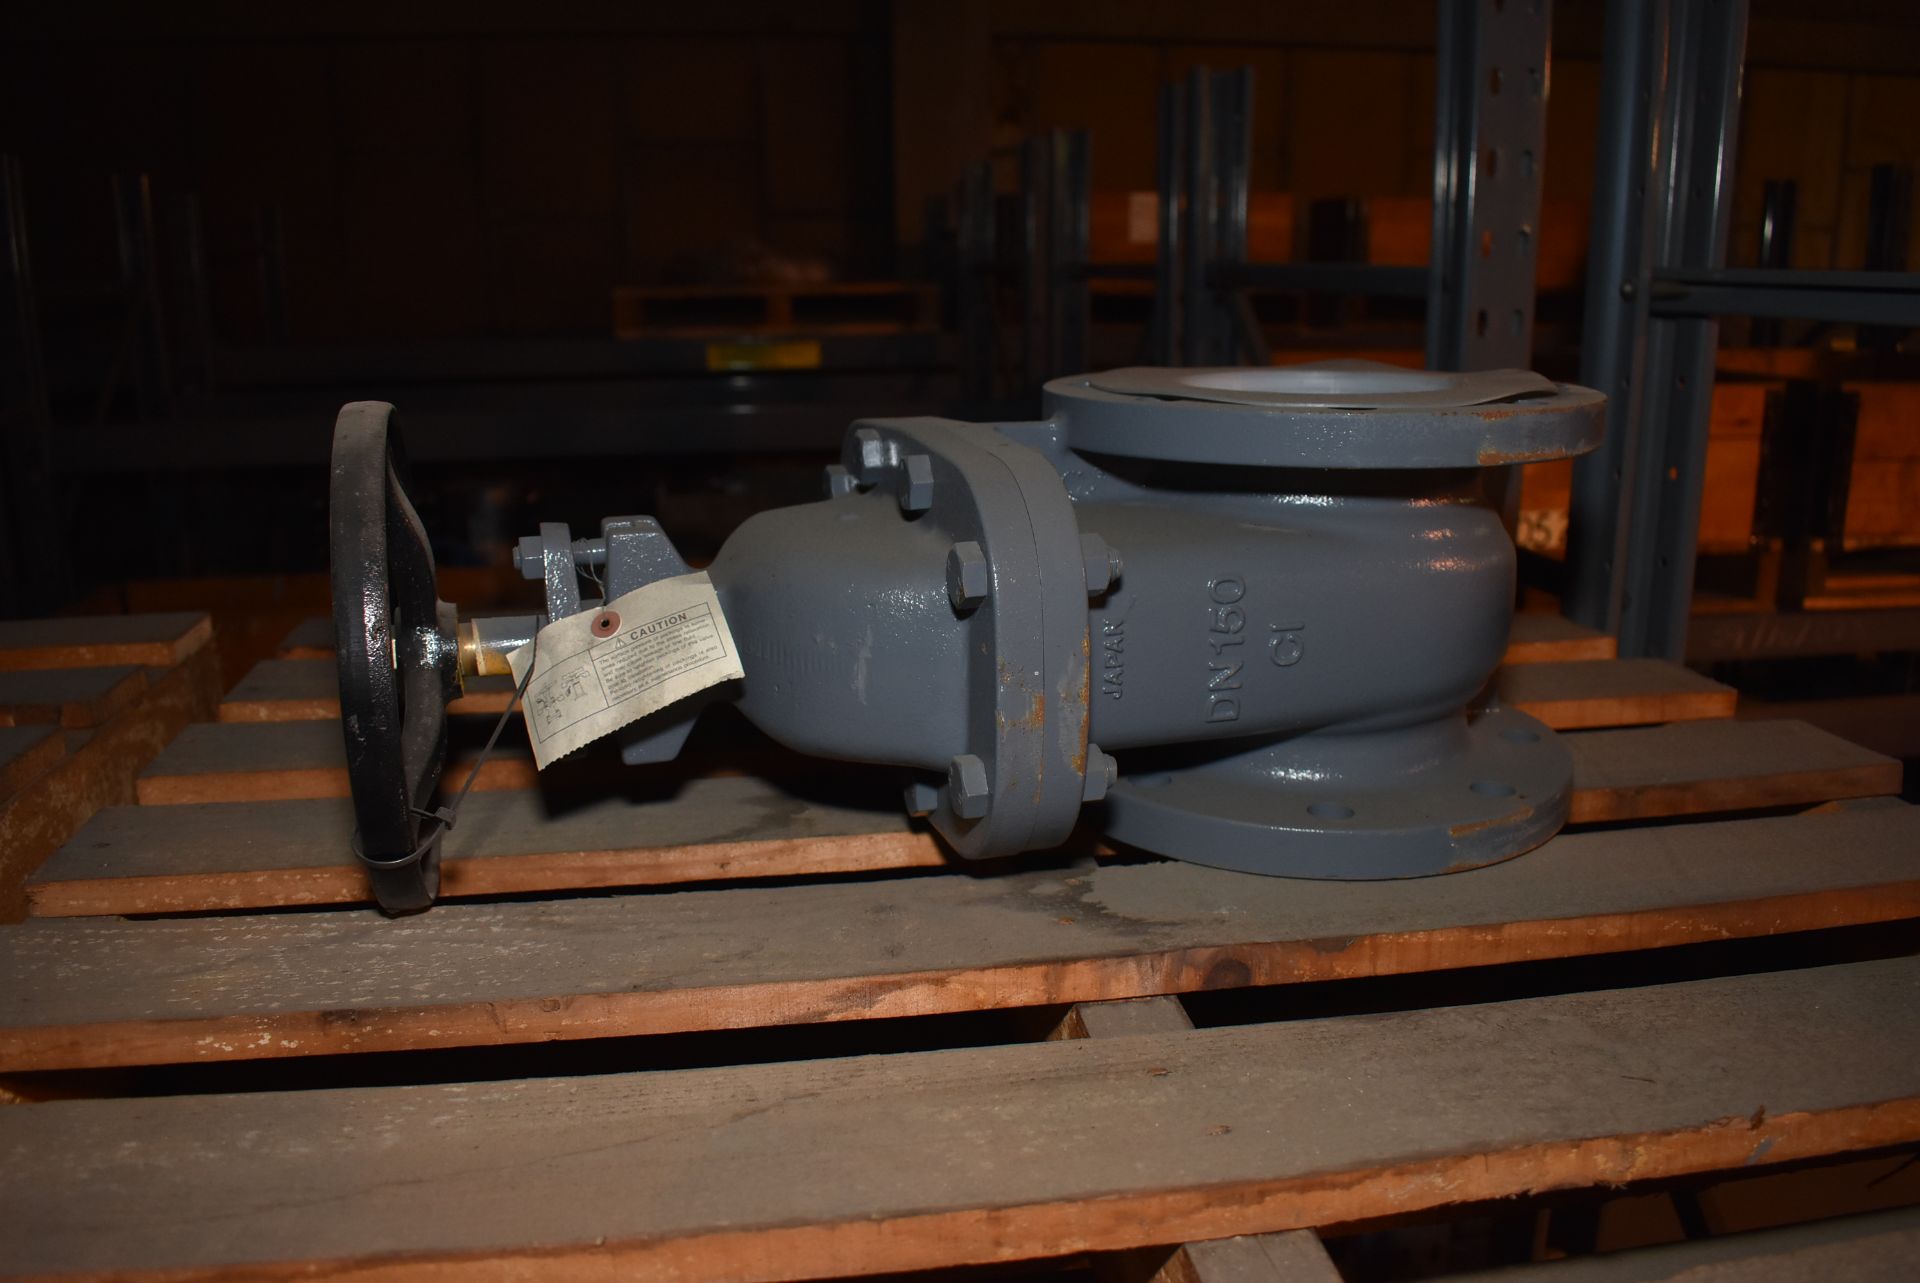 6in. Flanged Wedge Gate Valve (59-05-094) MS-MP083 (please note this lot is part of combination